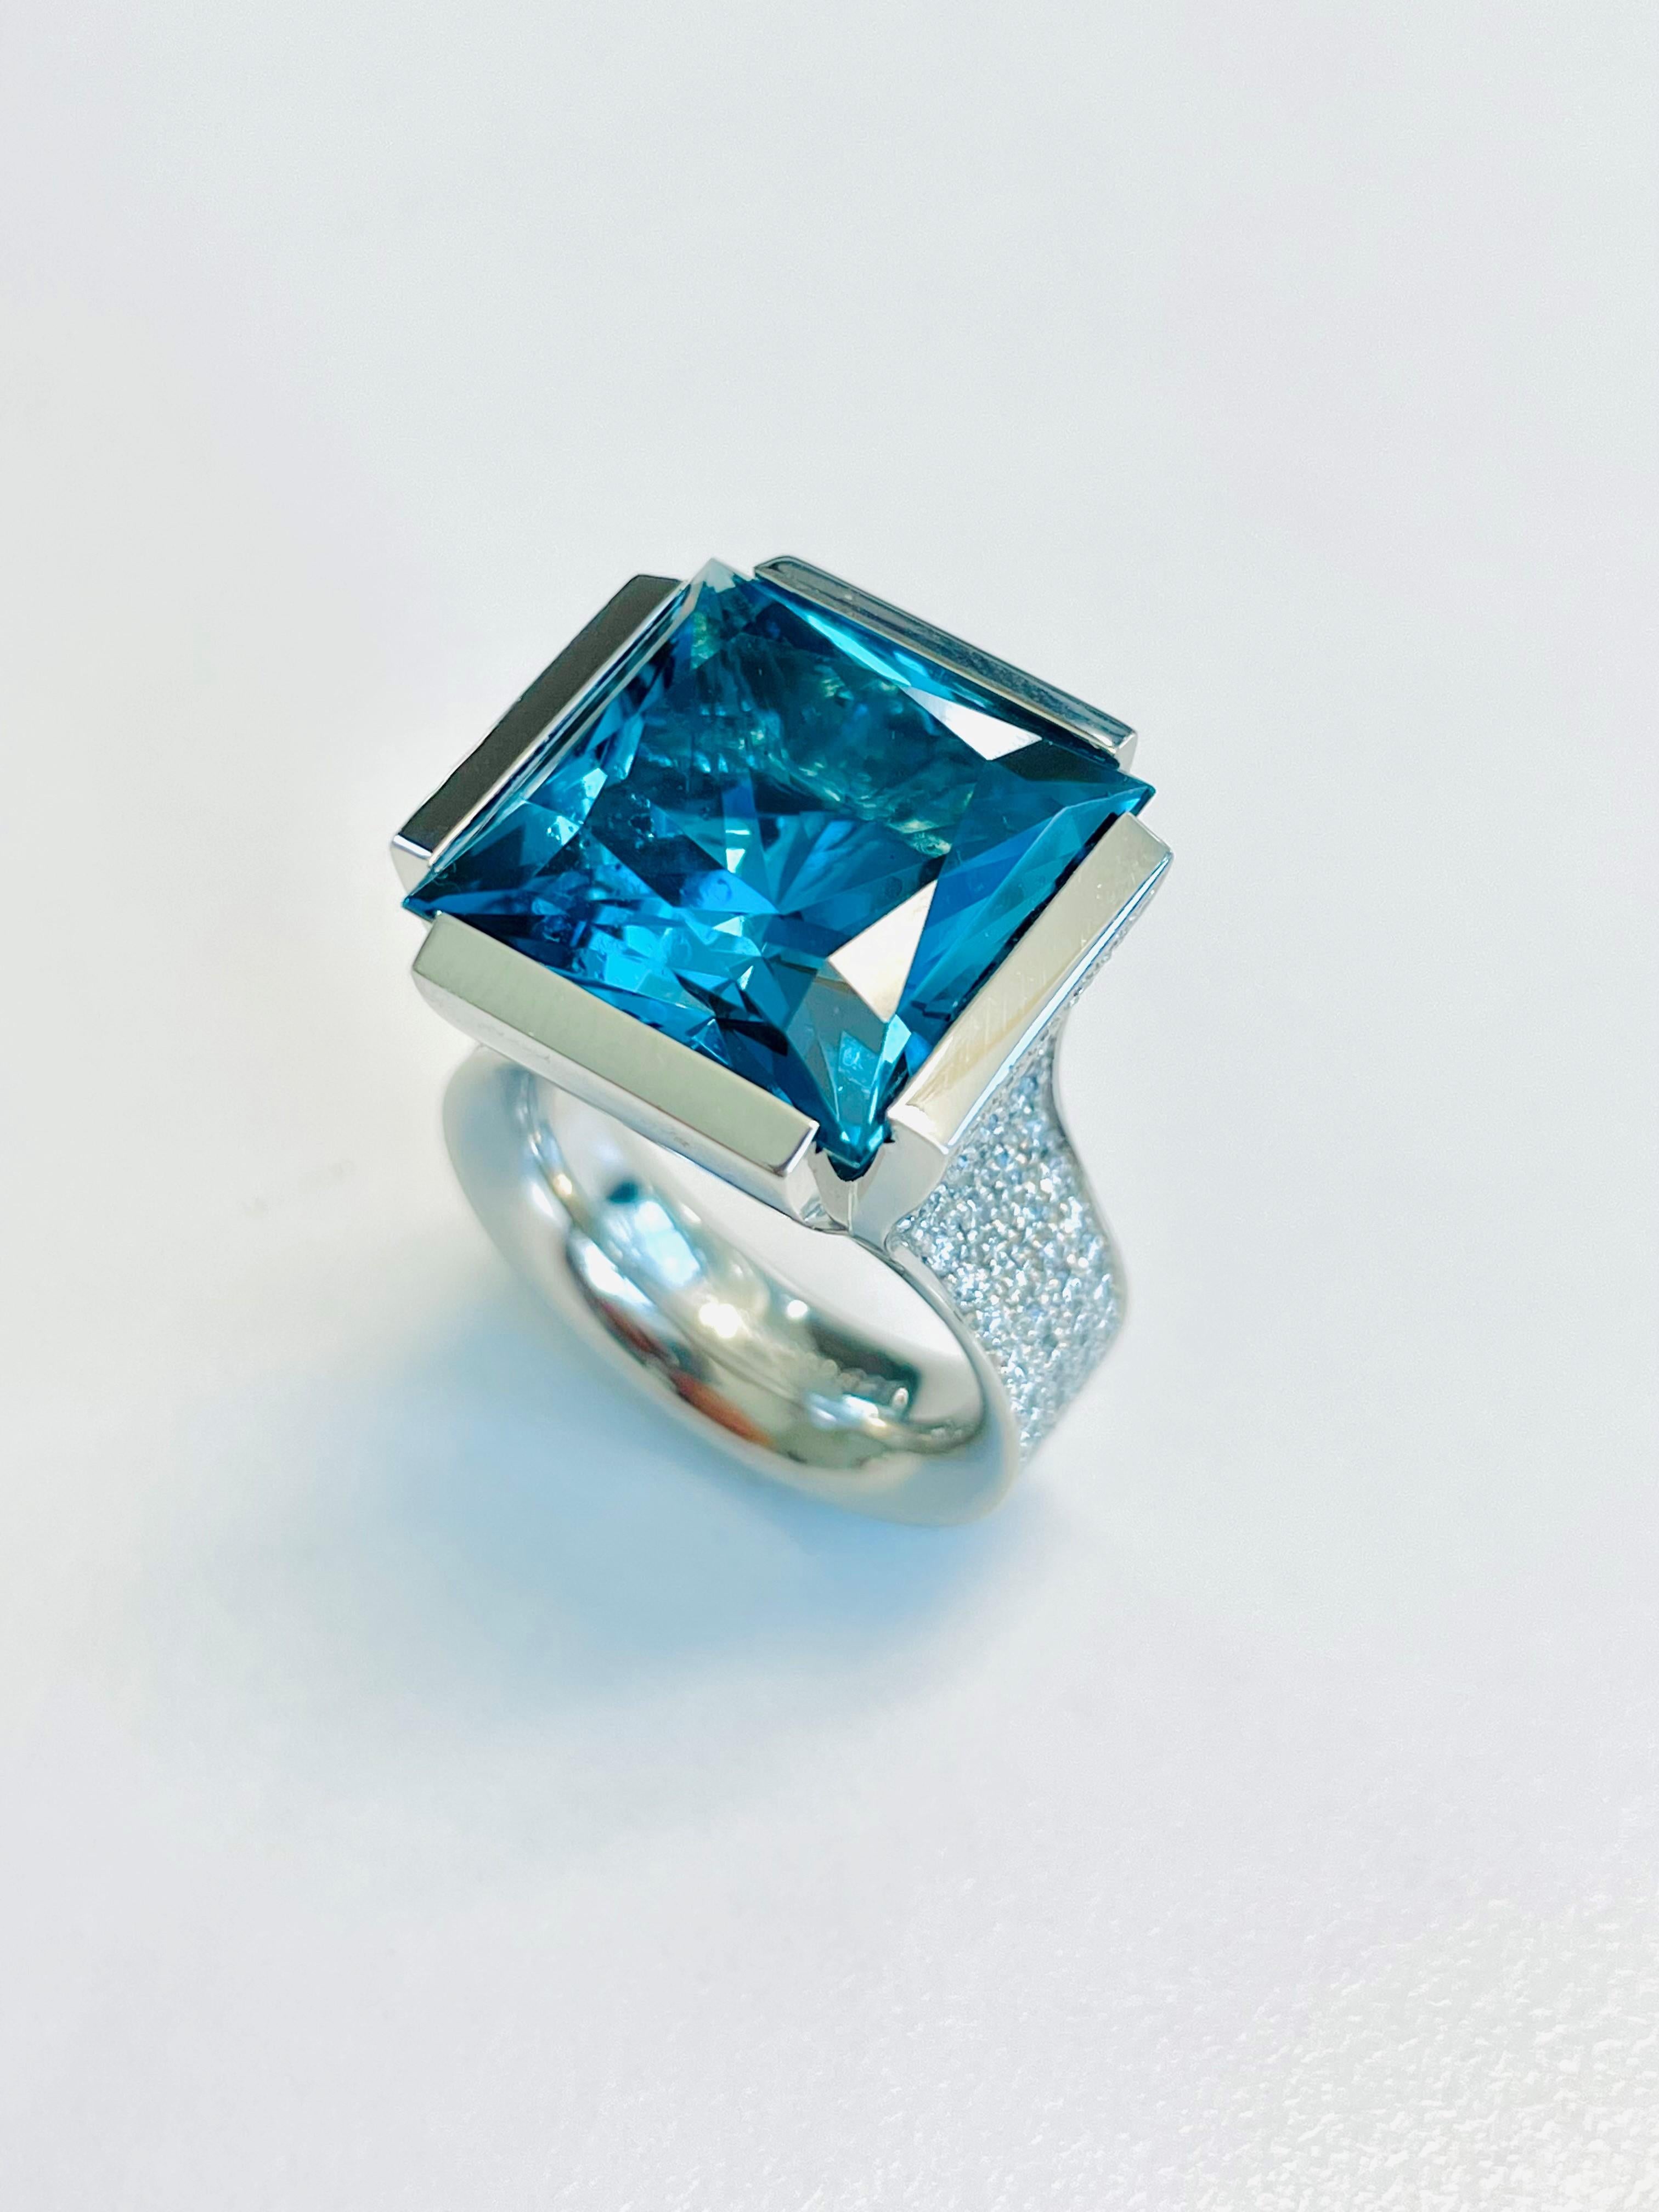 Platinum Cocktail Ring with a stunning Blue Topaz (15x15mm) Princess Cut and 164 brilliant cut diamonds F-vs with a total of 1.75ct. 
This ring was handmade by Henrich & Denzel the platinum manufactory at Lake Constance in Germany. 
Henrich & Denzel